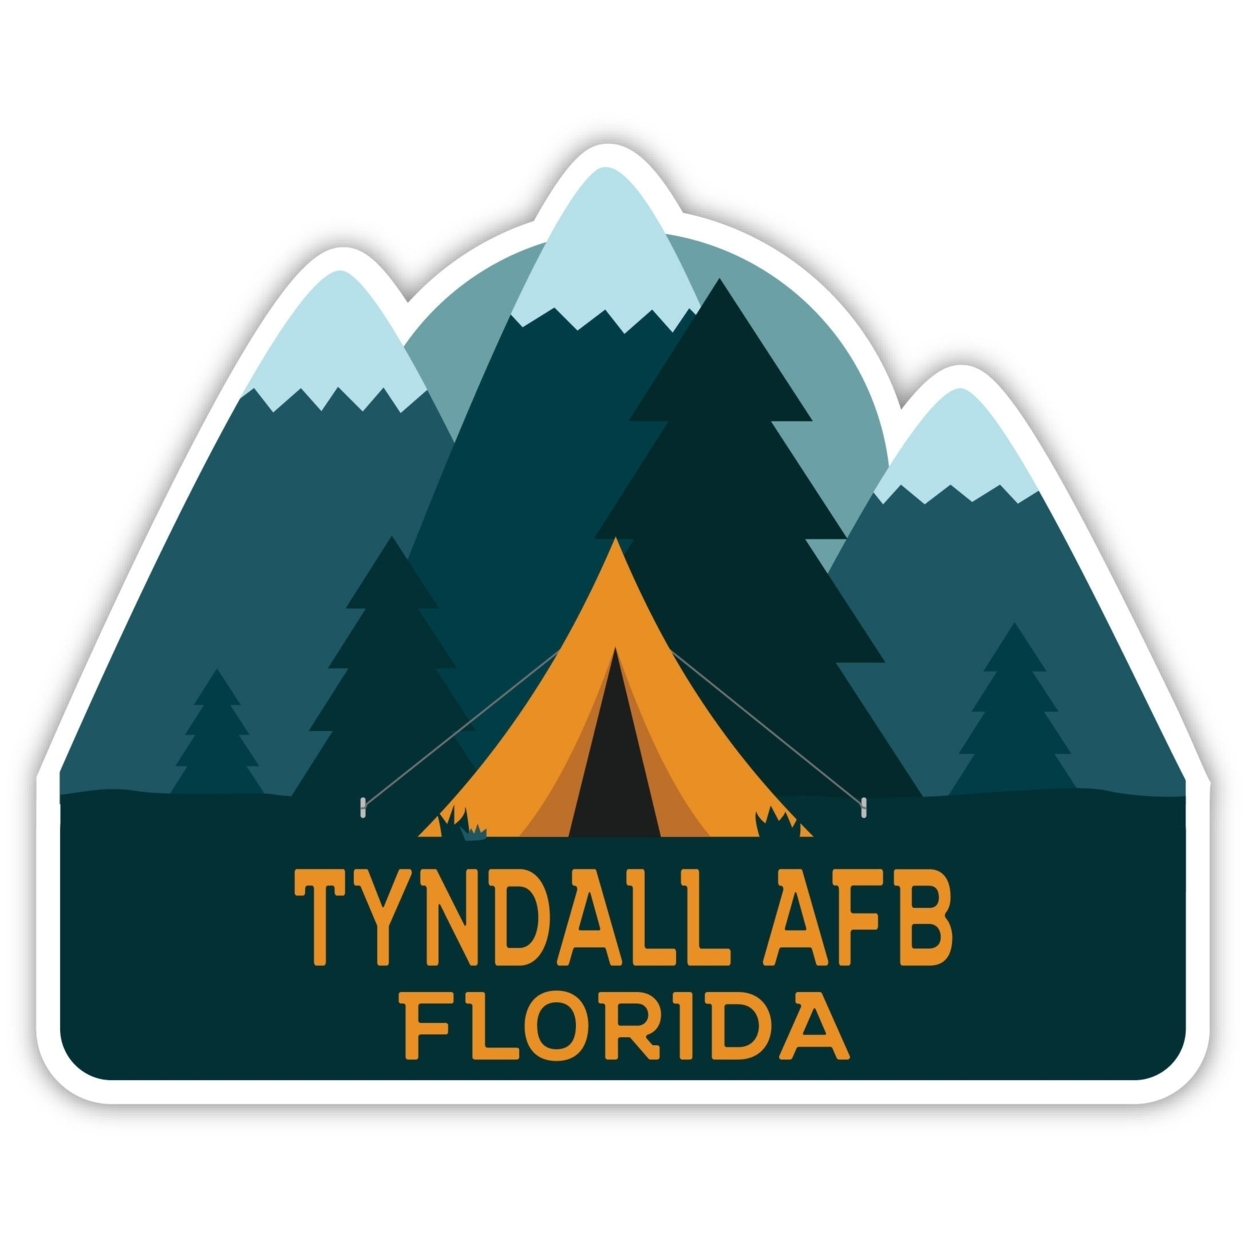 Tyndall AFB Florida Souvenir Decorative Stickers (Choose Theme And Size) - Single Unit, 2-Inch, Tent